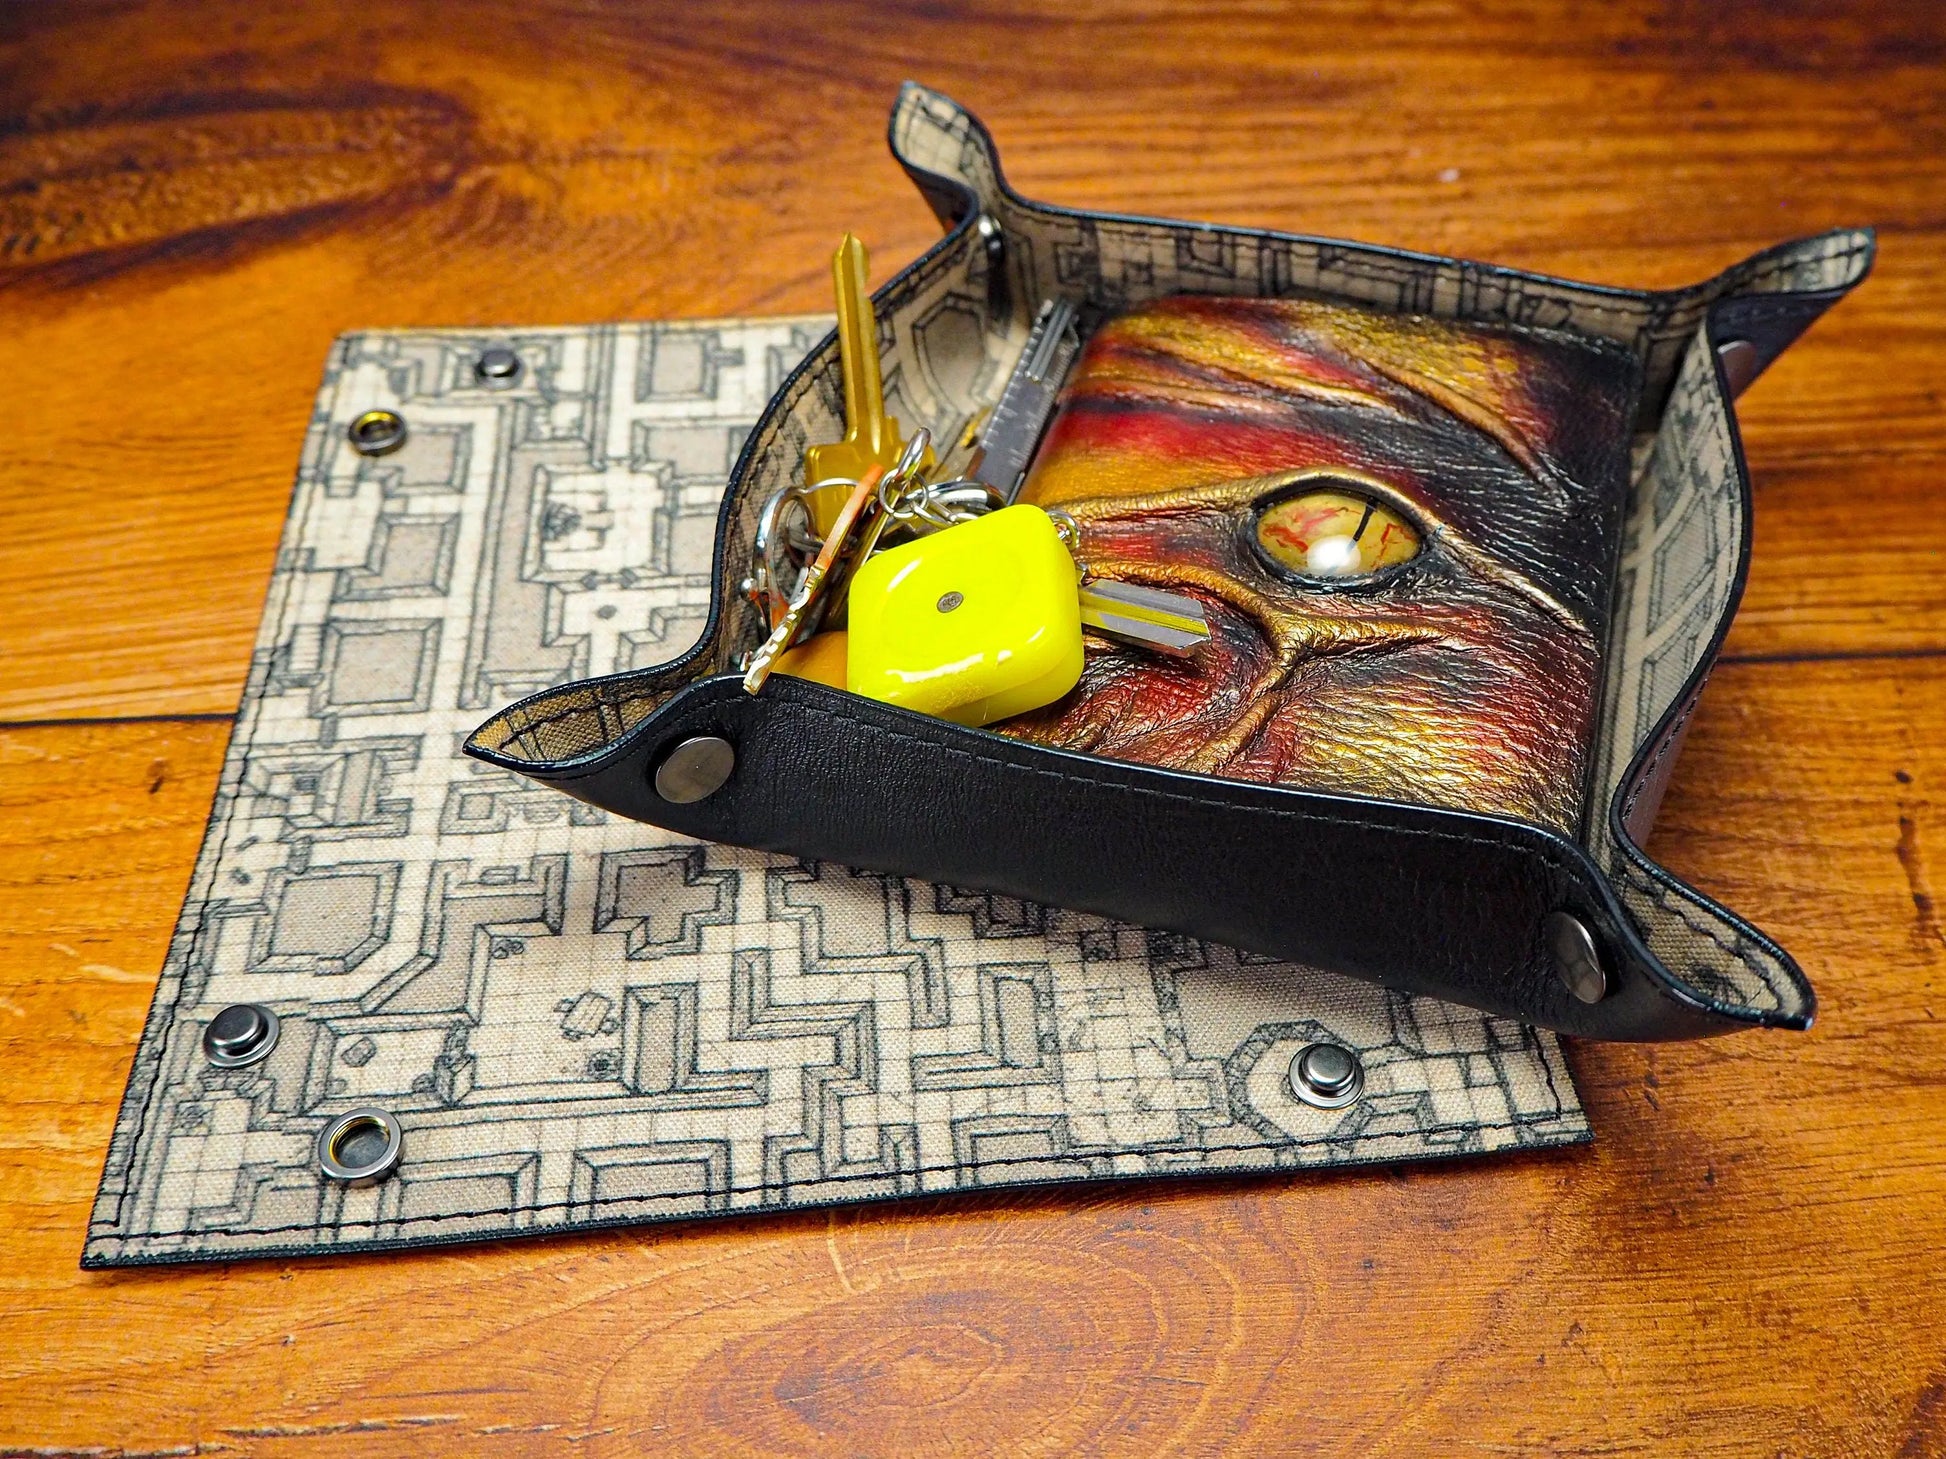 Canvas Map Dice and Leather Dice Tray - Collapsible Leather Dice Tray a fantastic DnD Gift for Dice Games EmBrace Leather